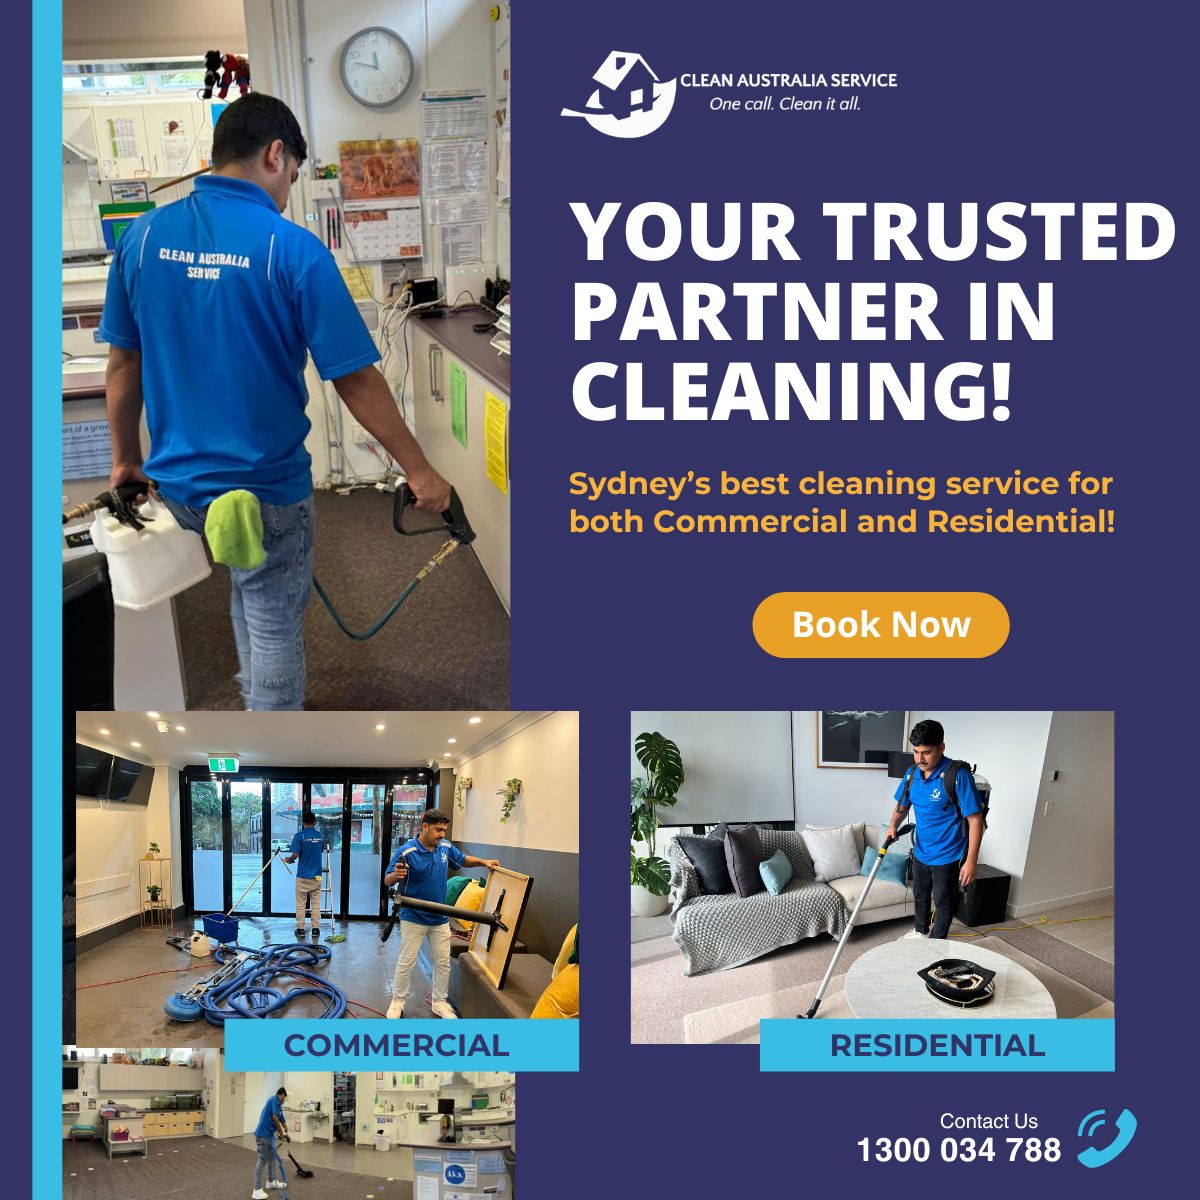 Clean Australia Service - your trusted partner in cleaning